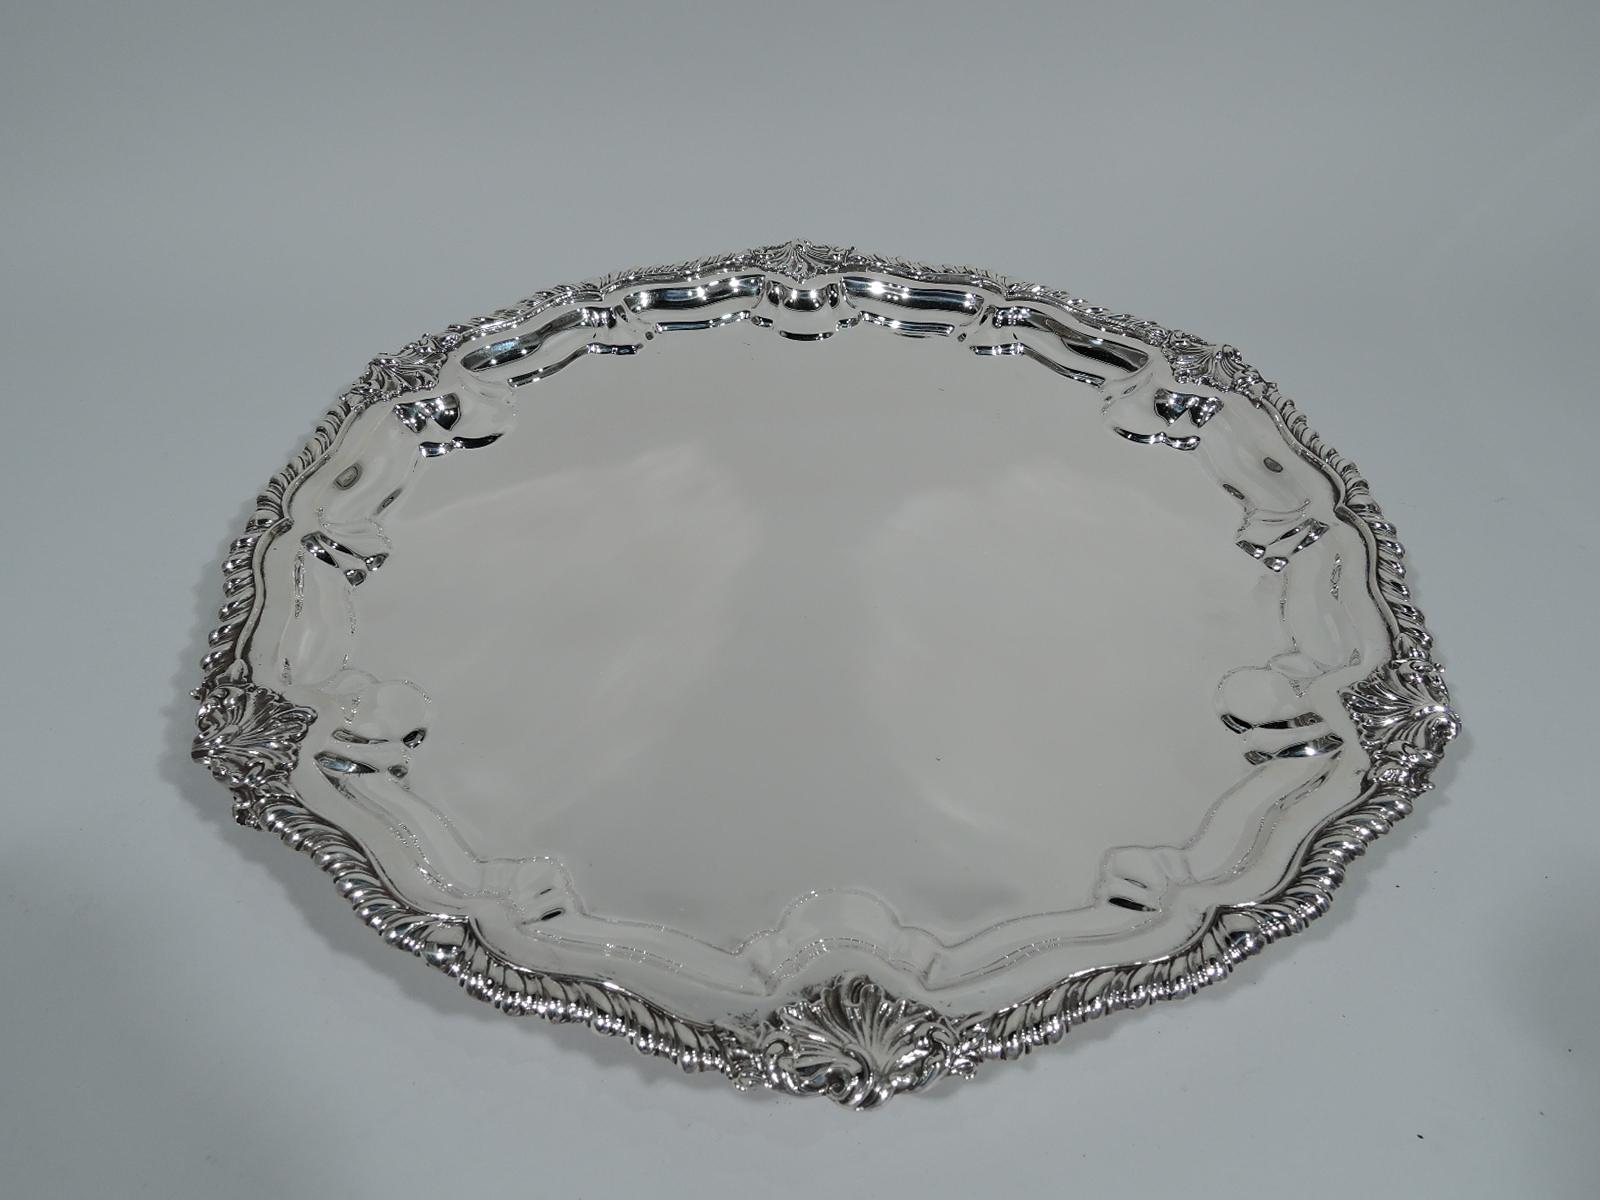 Georgian Revival sterling silver salver. Made by Howard & Co. in New York in 1905. Round with gently scrolled and gadrooned rim interspersed with scallop shells. Rests on three scallop shells supports. A beautiful piece in the traditional style.